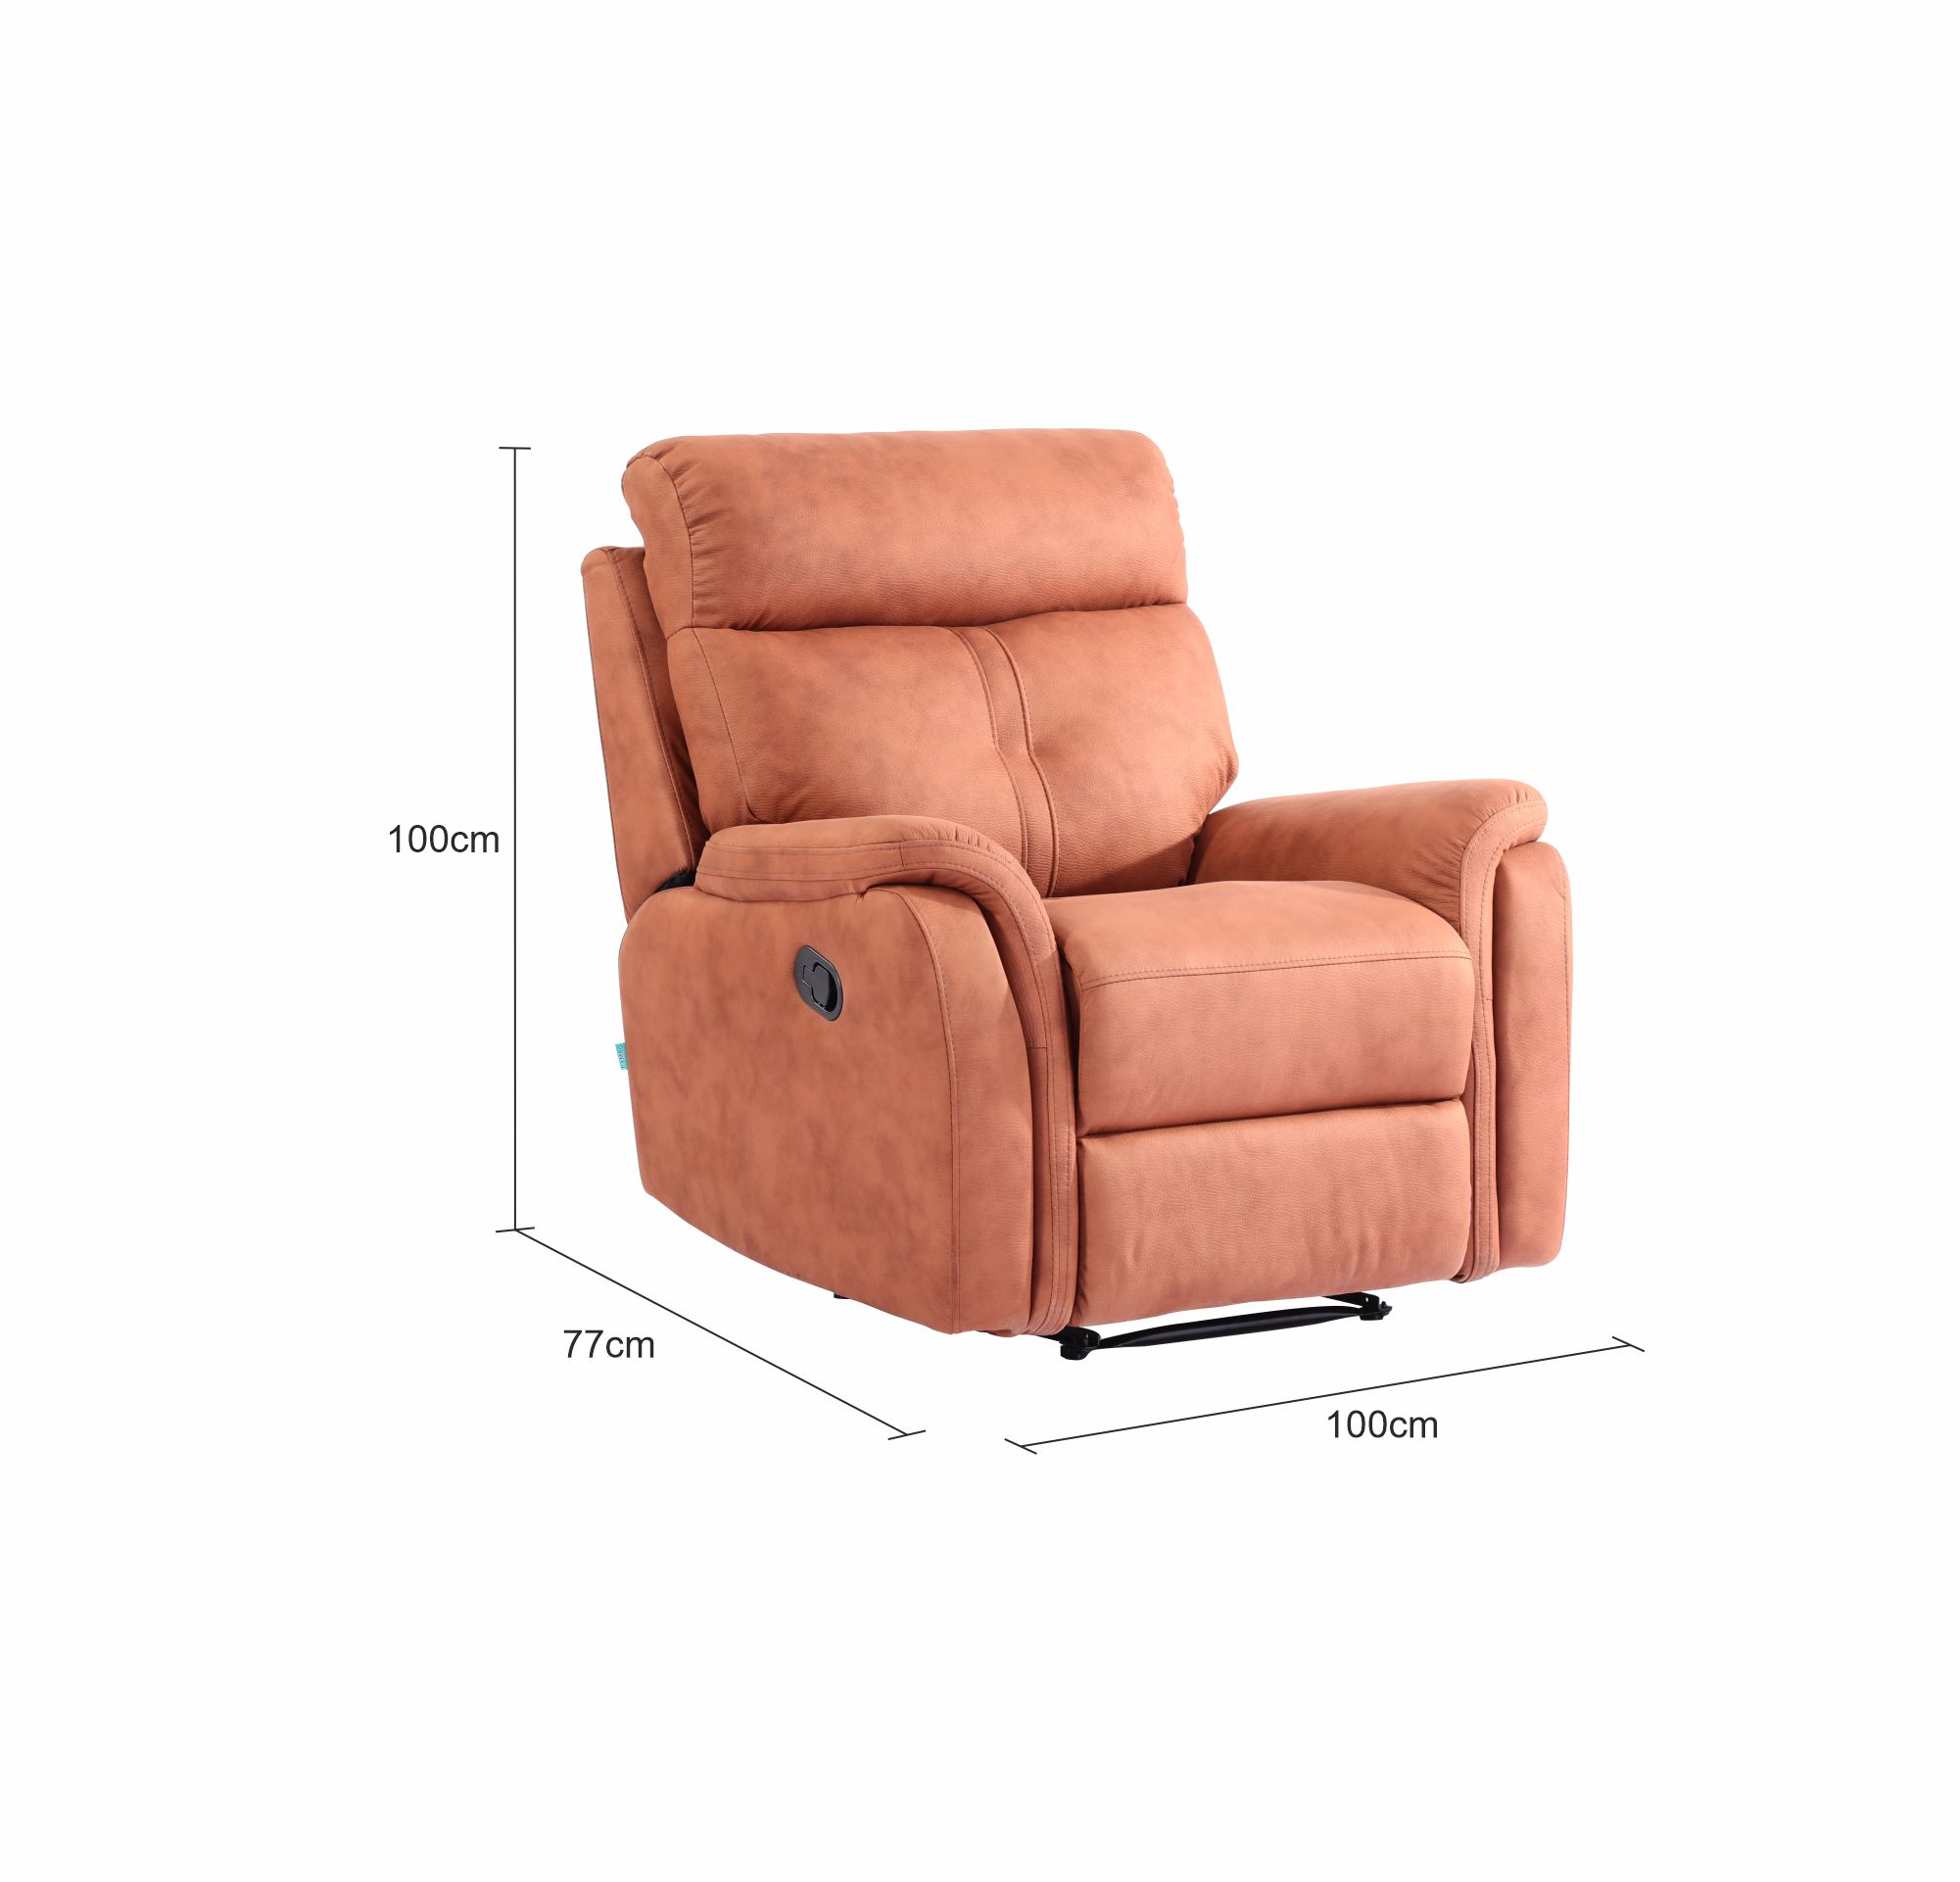 SAC001R-Alicia Sofa 1 Seater With Recliner-NZ02